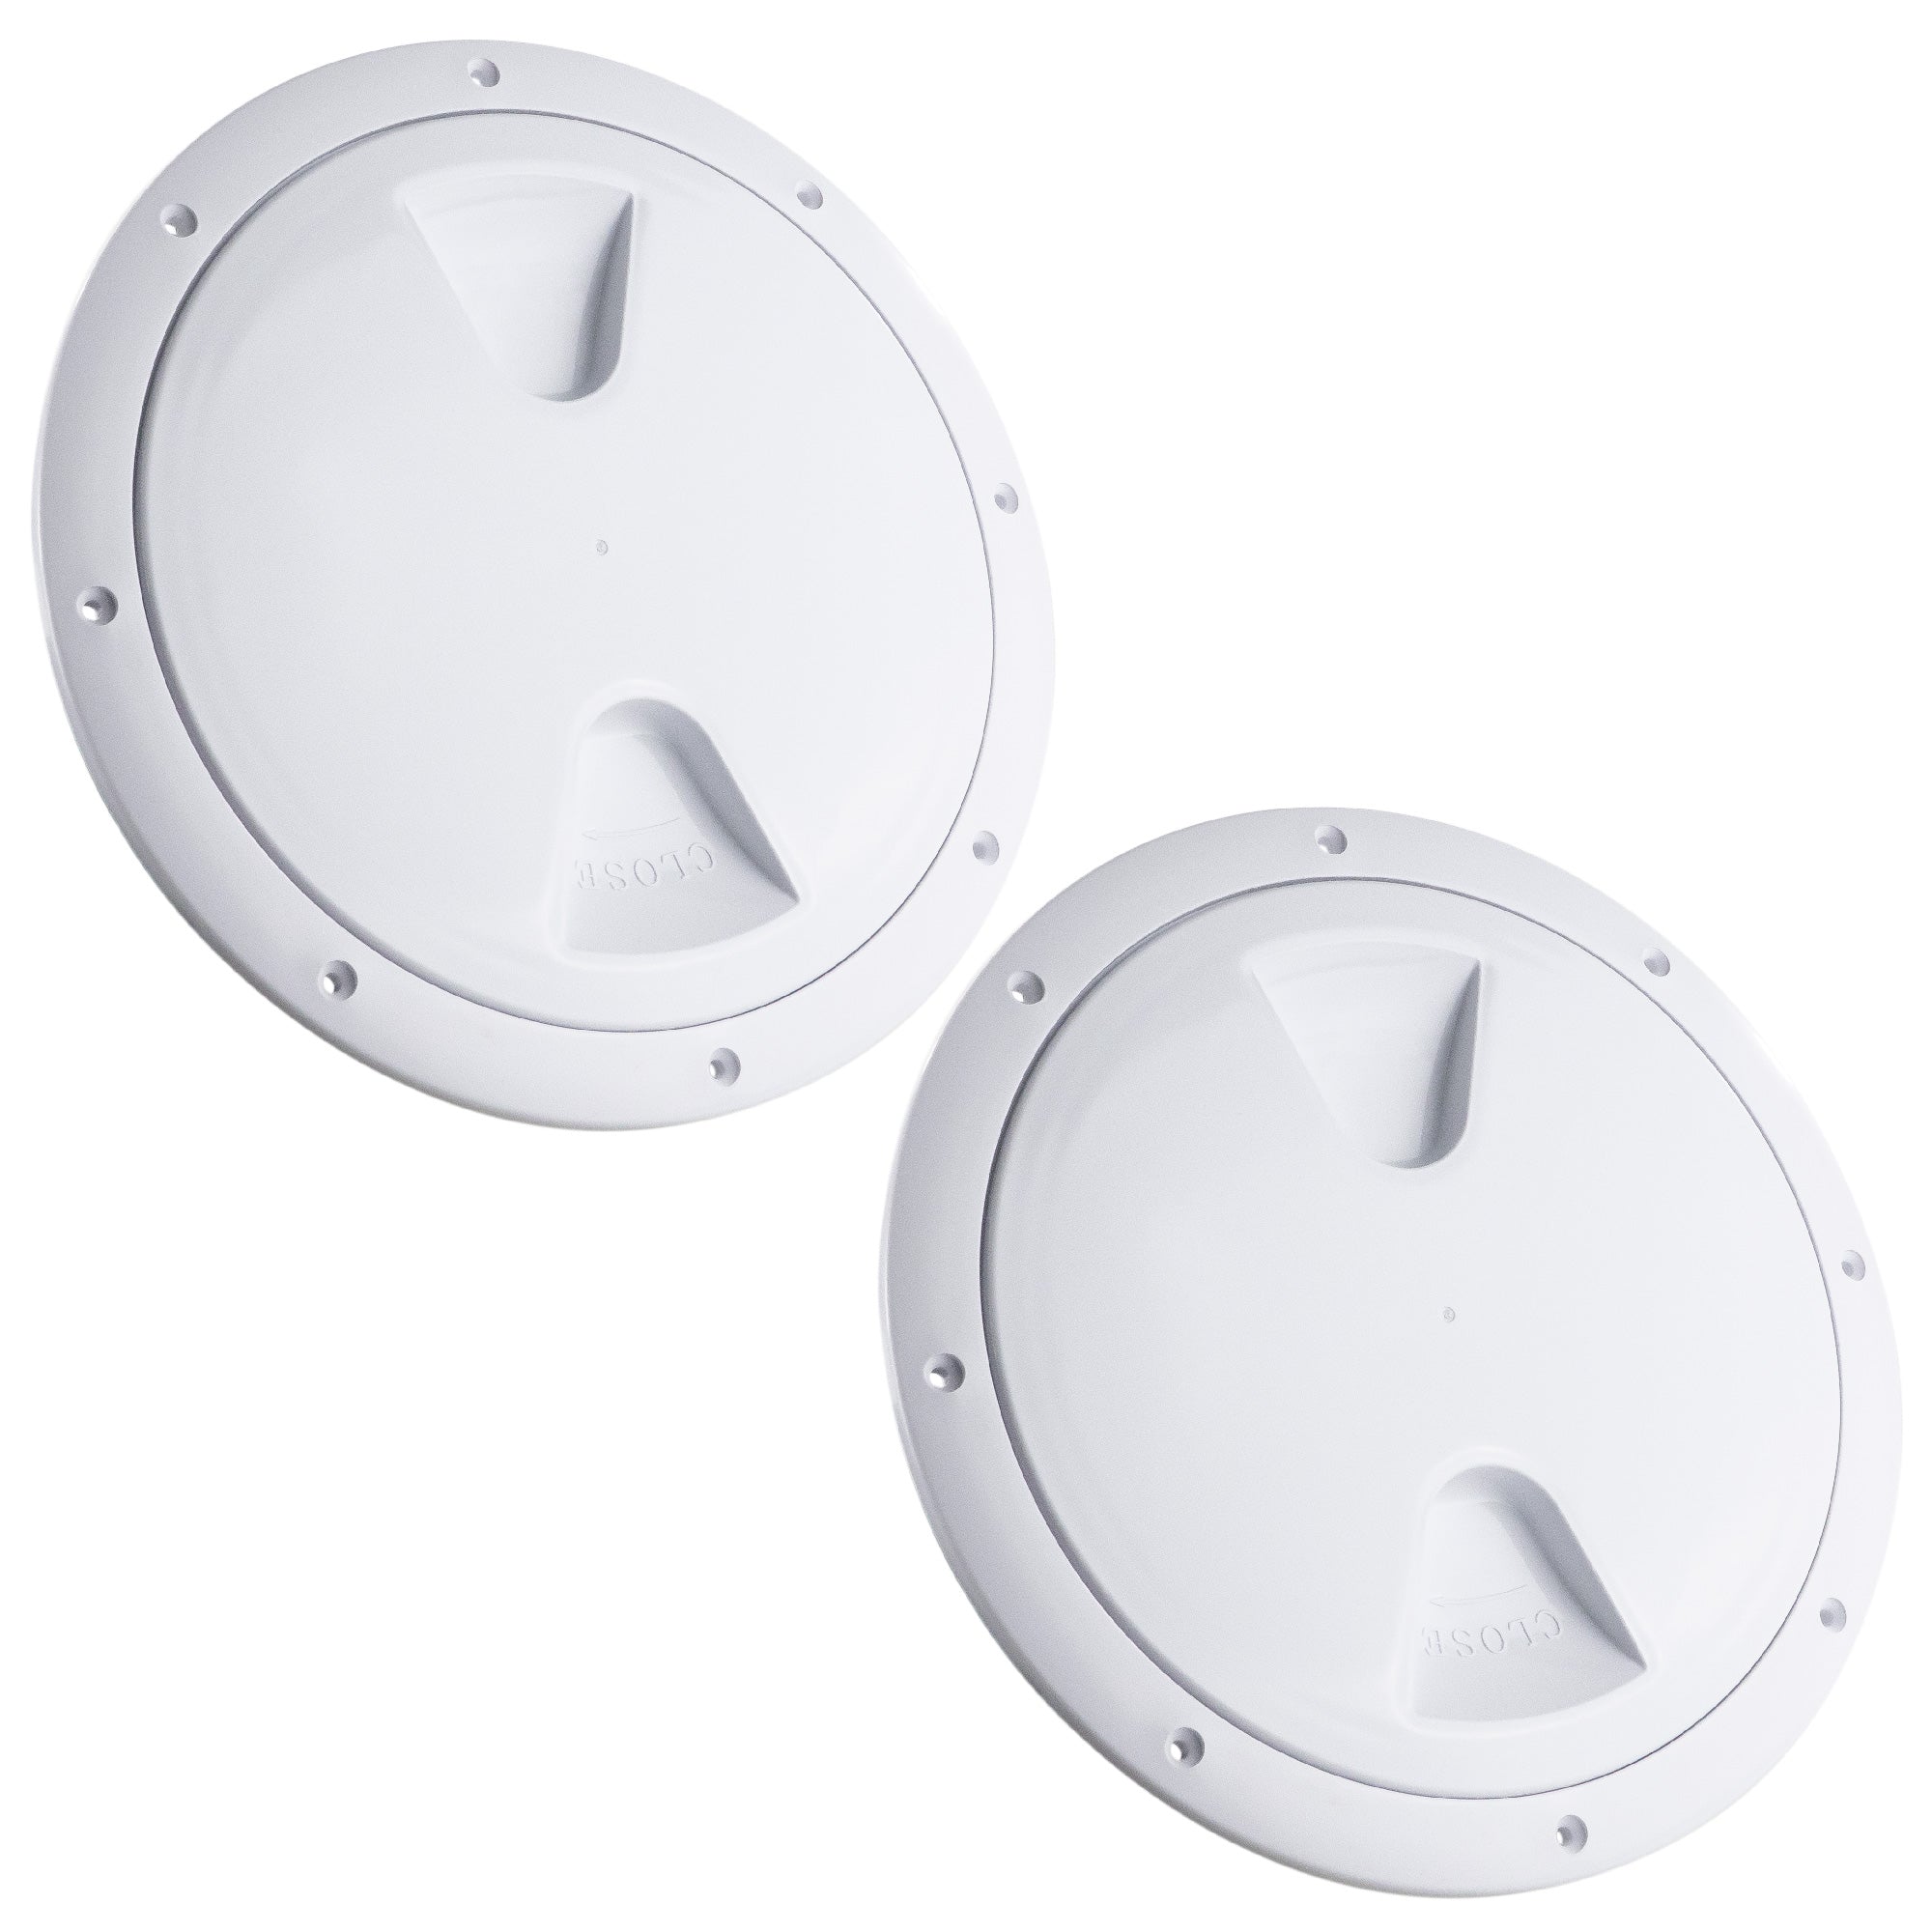 8" Deck Plate, Round, White 2-Pack - FO571-M2